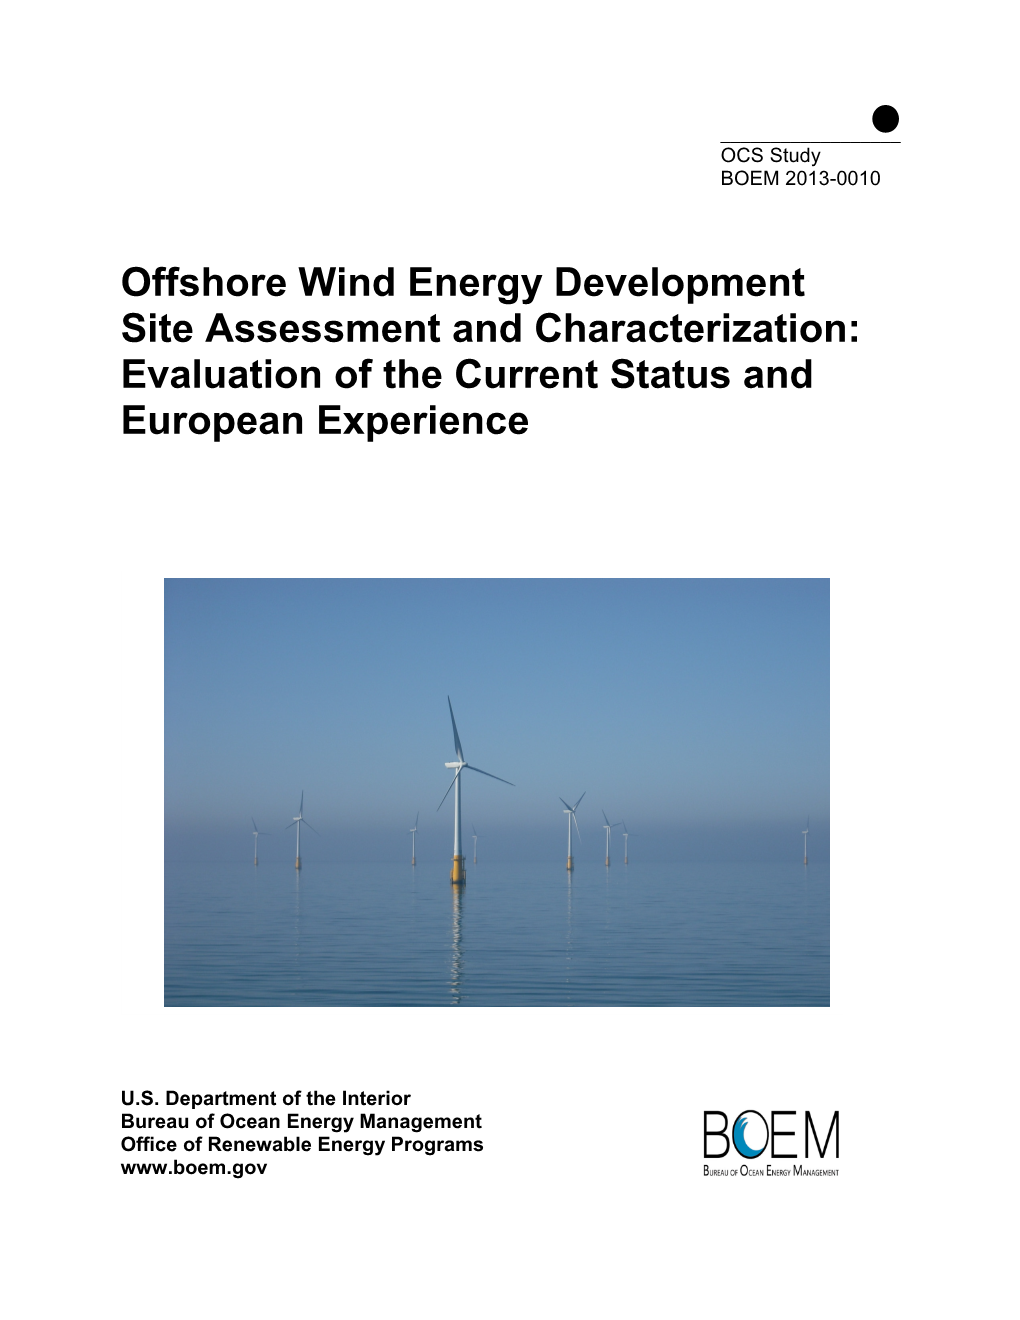 Offshore Wind Energy Development Site Assessment and Characterization: Evaluation of the Current Status and European Experience